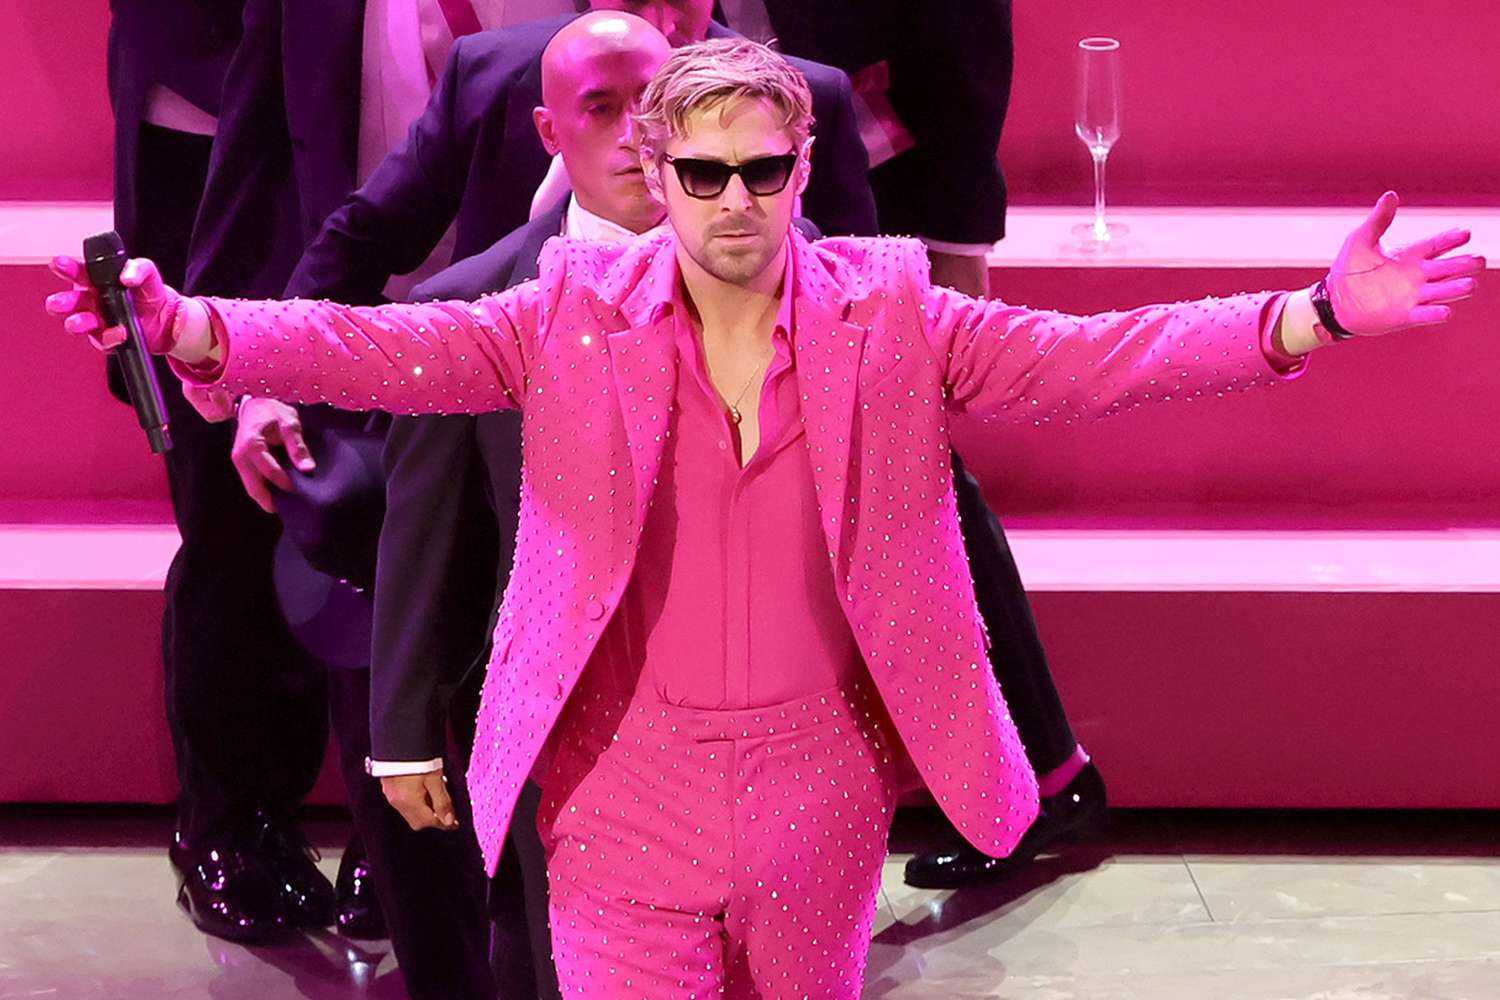 How Did Ryan Gosling craft every detail of his show-stopping 'I’m Just Ken' Oscar performance